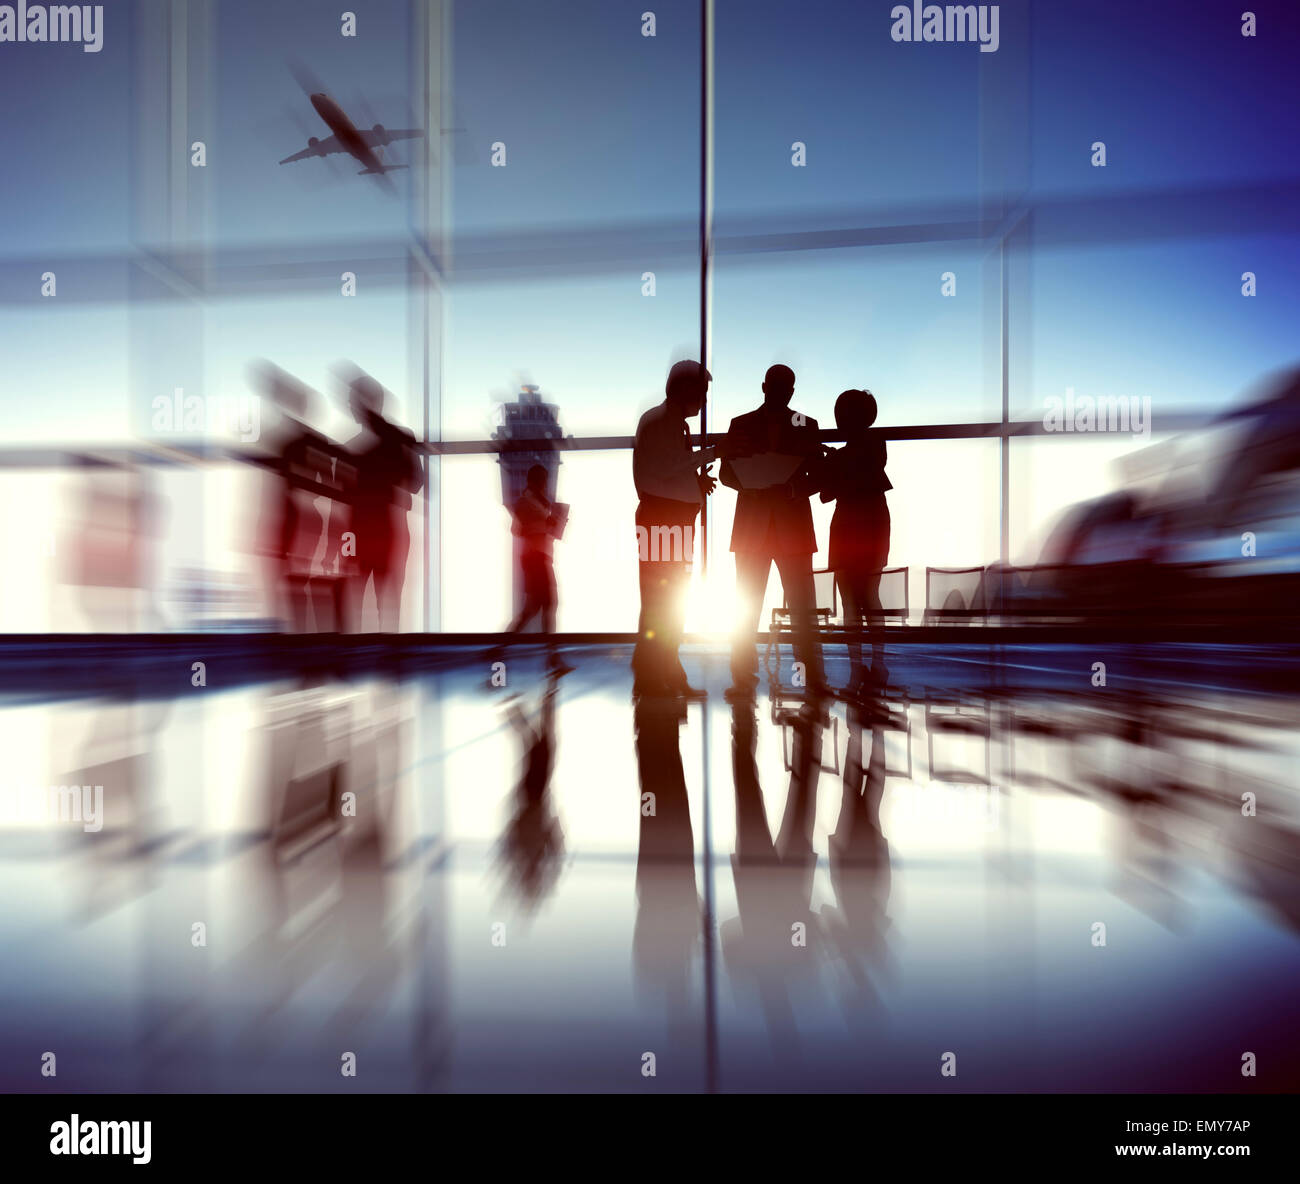 Airport Airplane Air Transportation Business Travel Concept Stock Photo